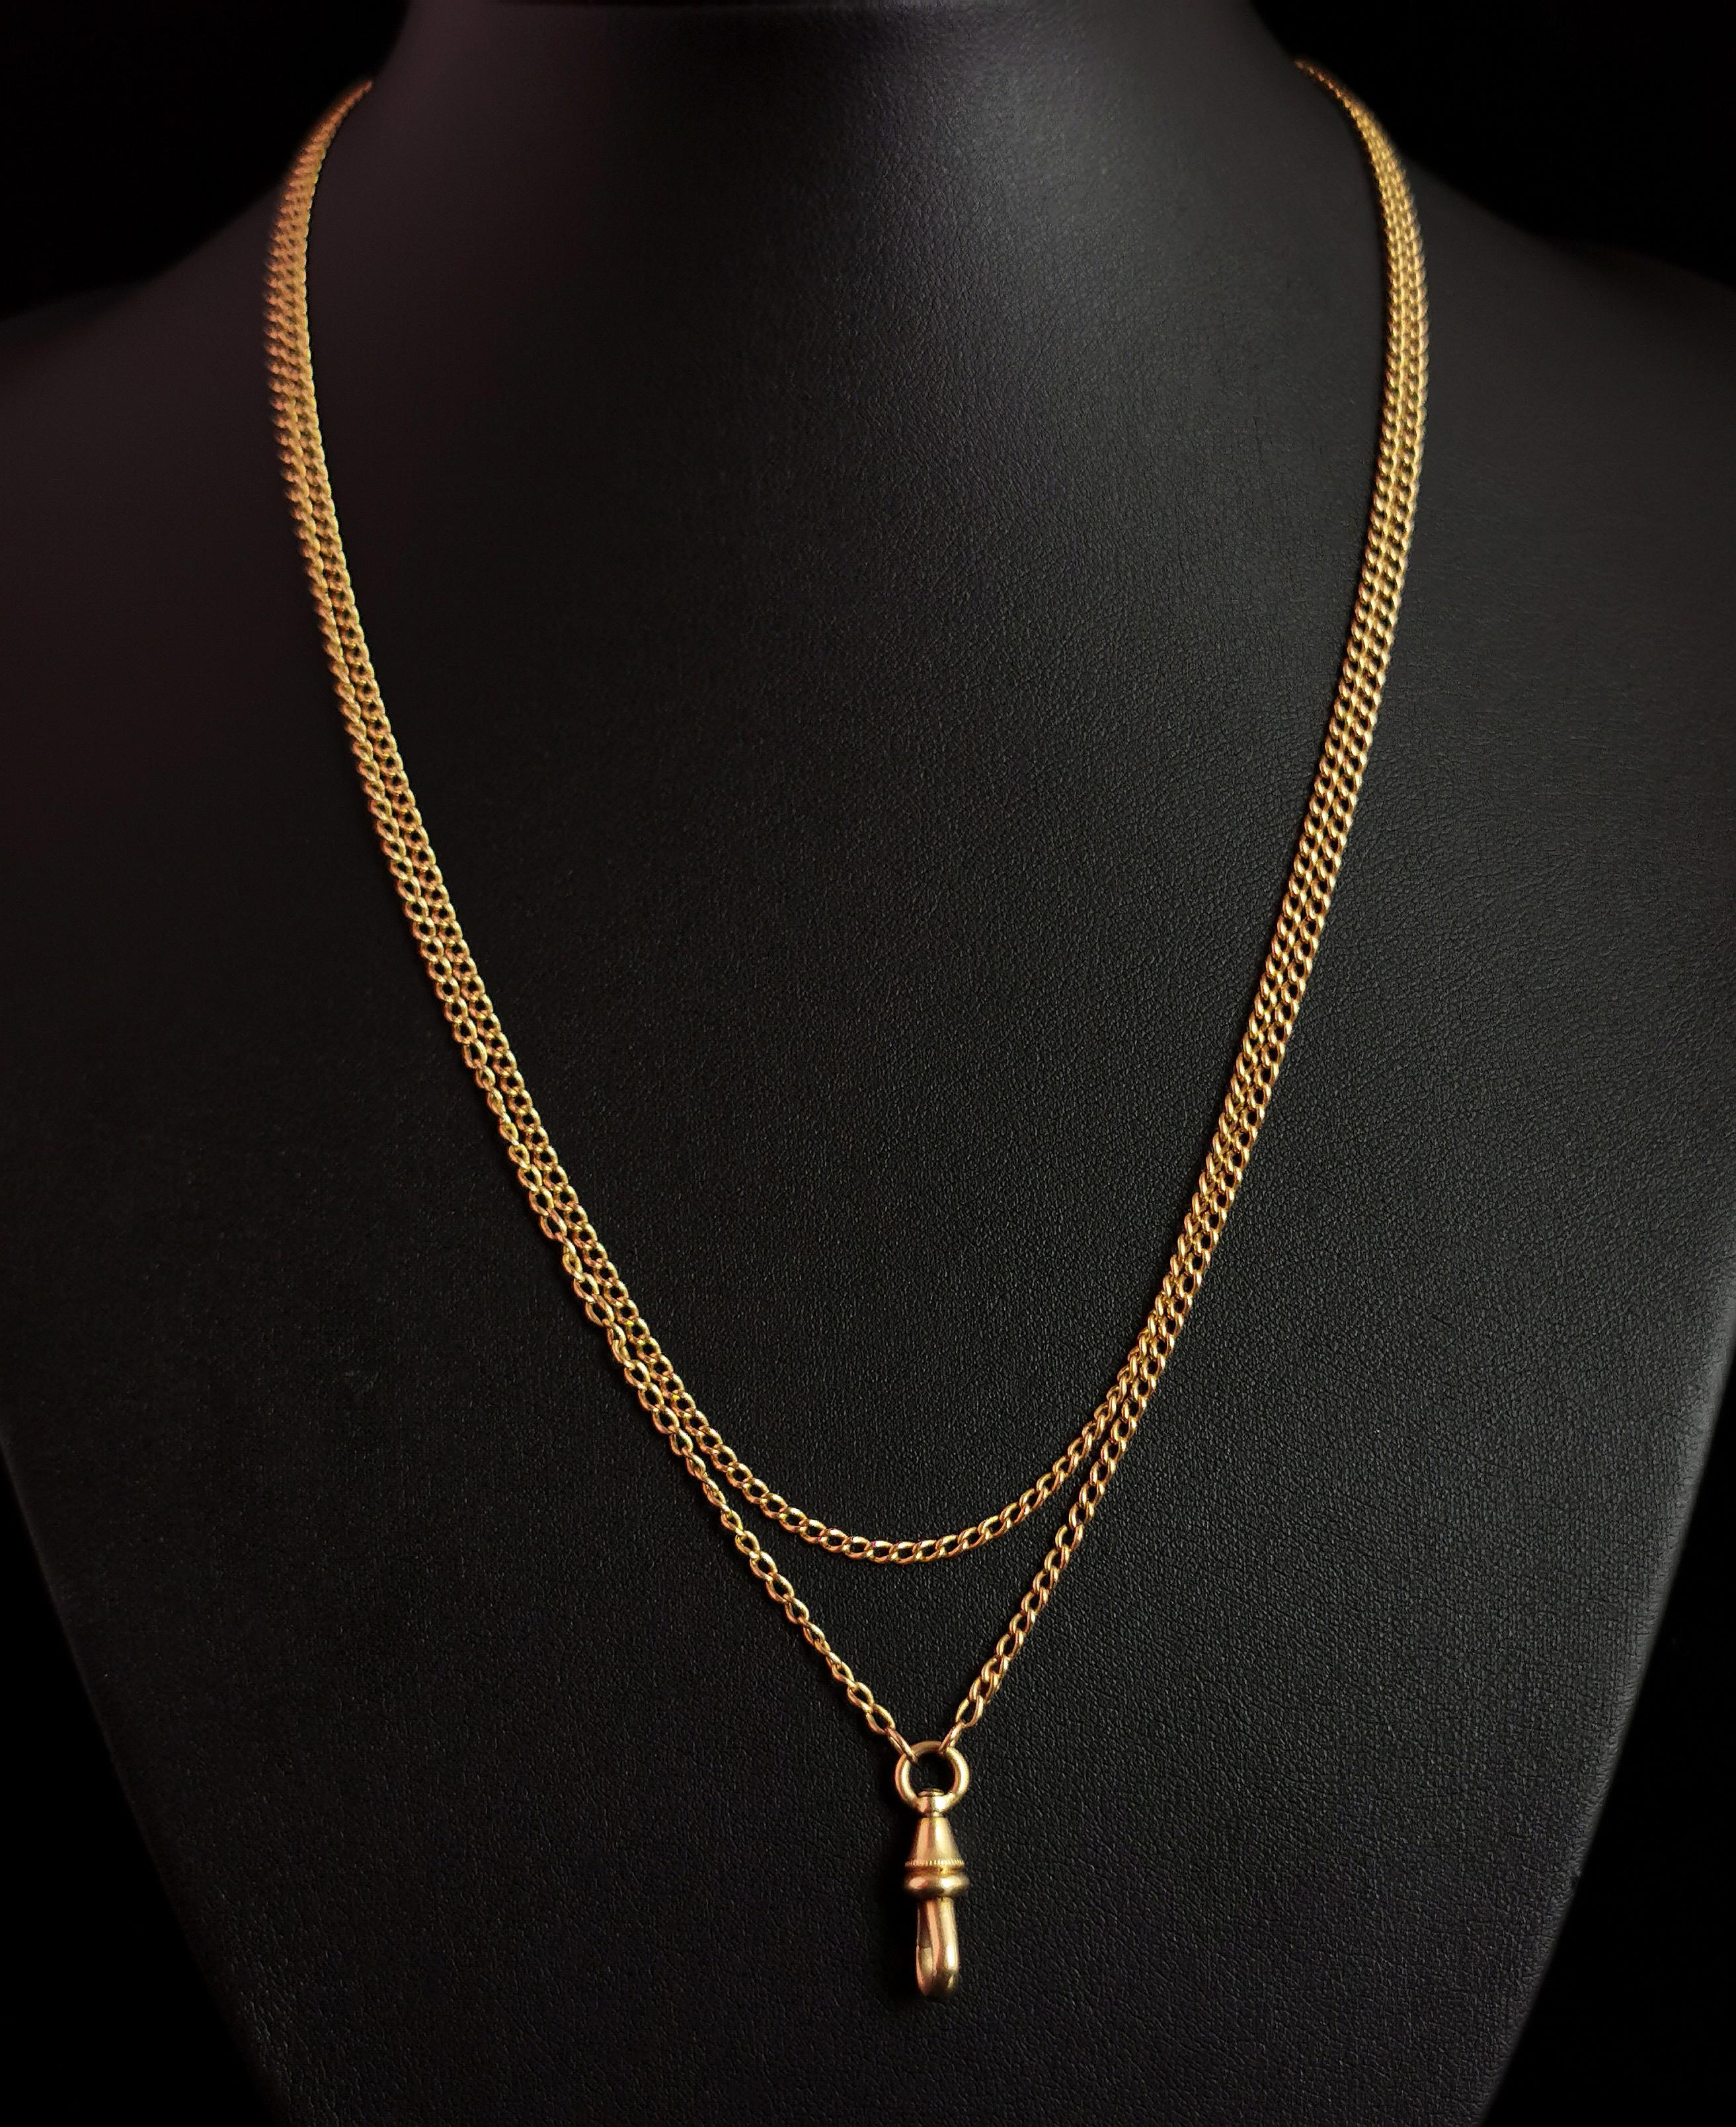 Antique 18k Yellow Gold Longuard Chain Necklace, Victorian 6